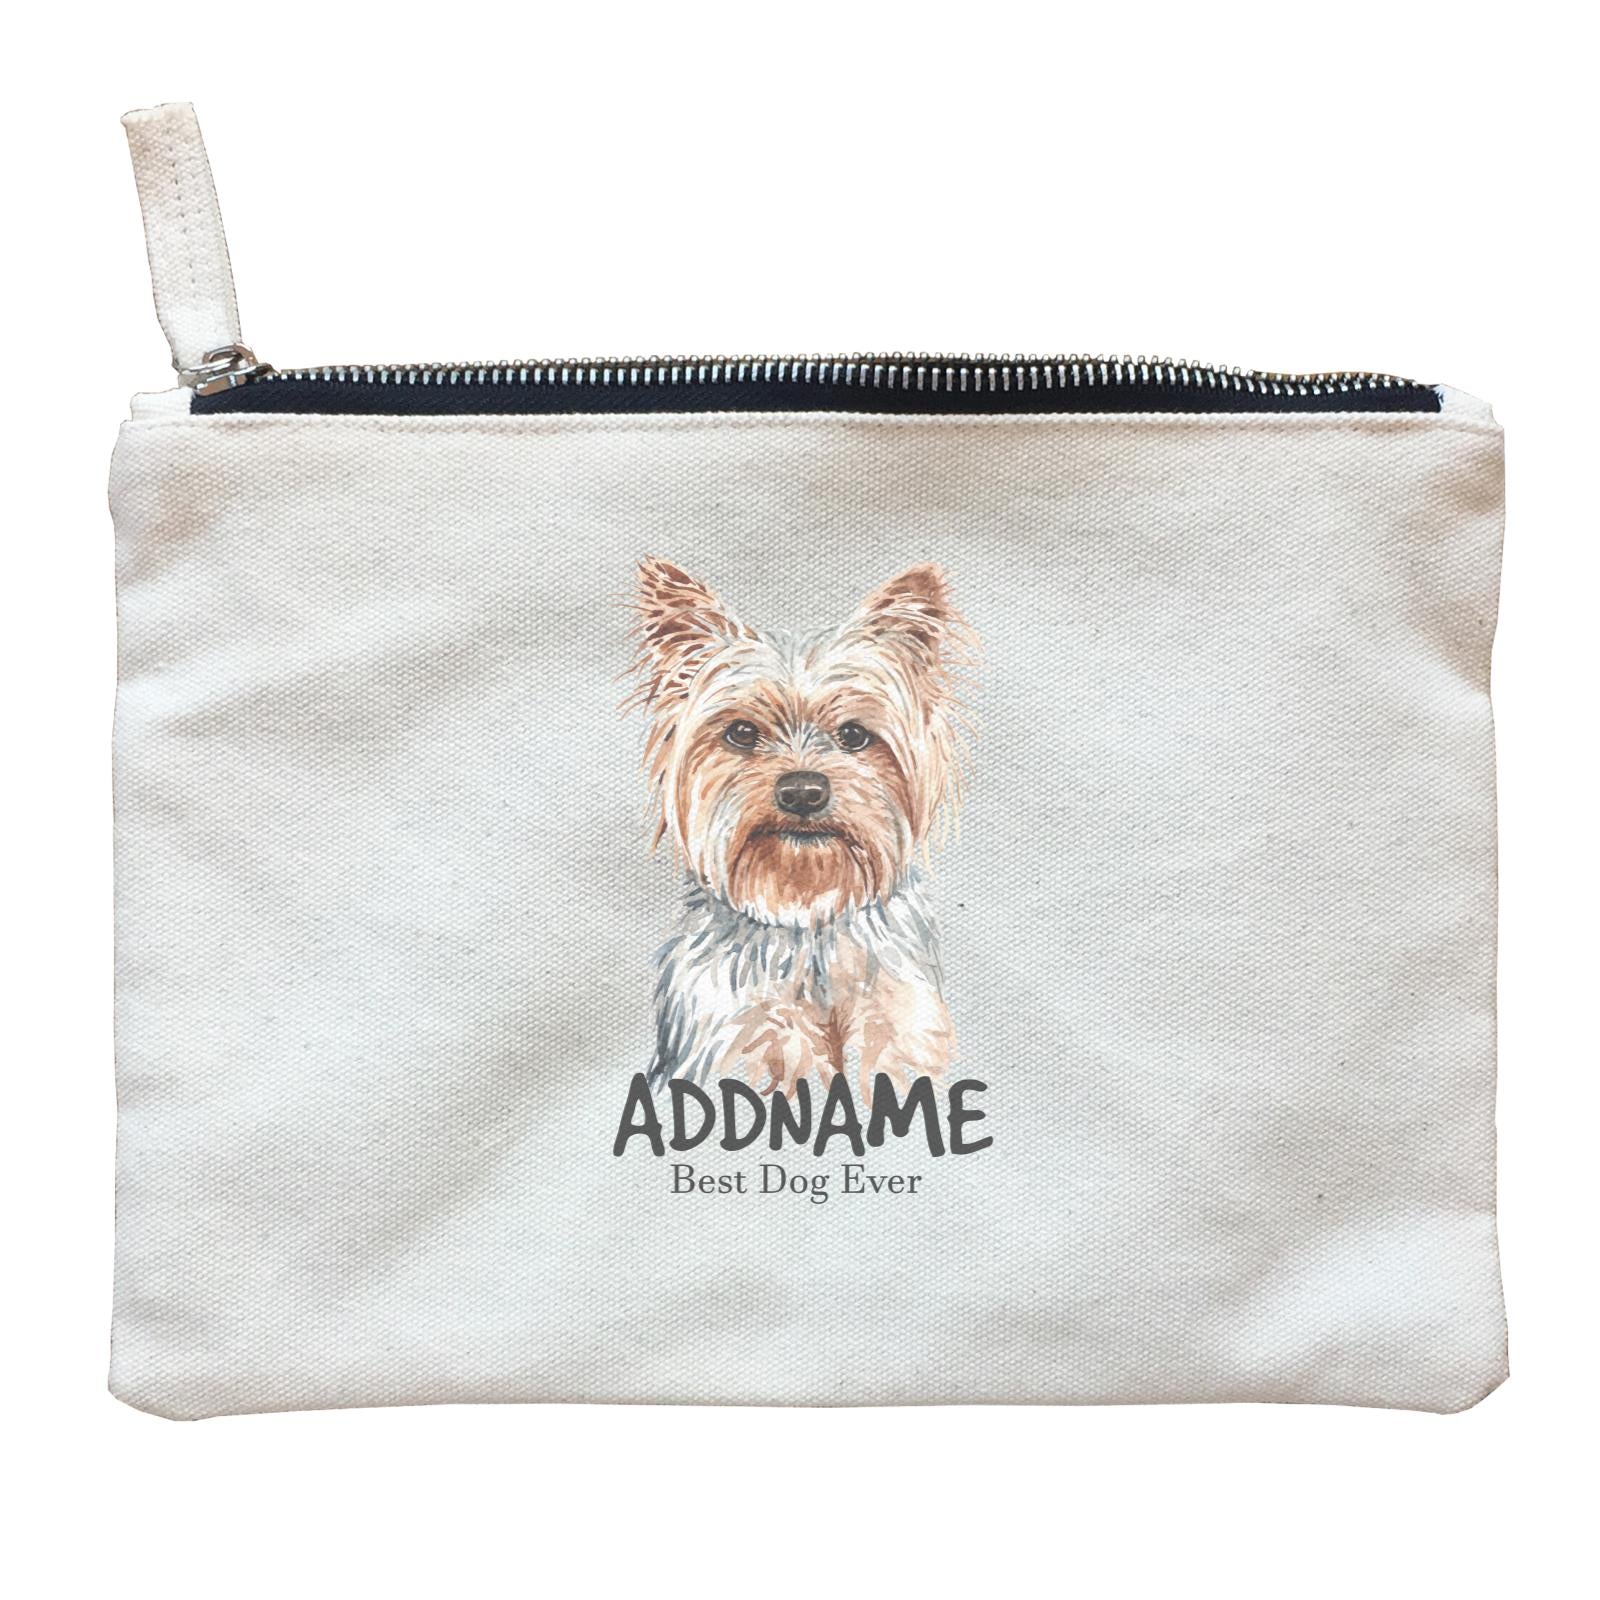 Watercolor Dog Yorkshire Terrier Best Dog Ever Addname Zipper Pouch